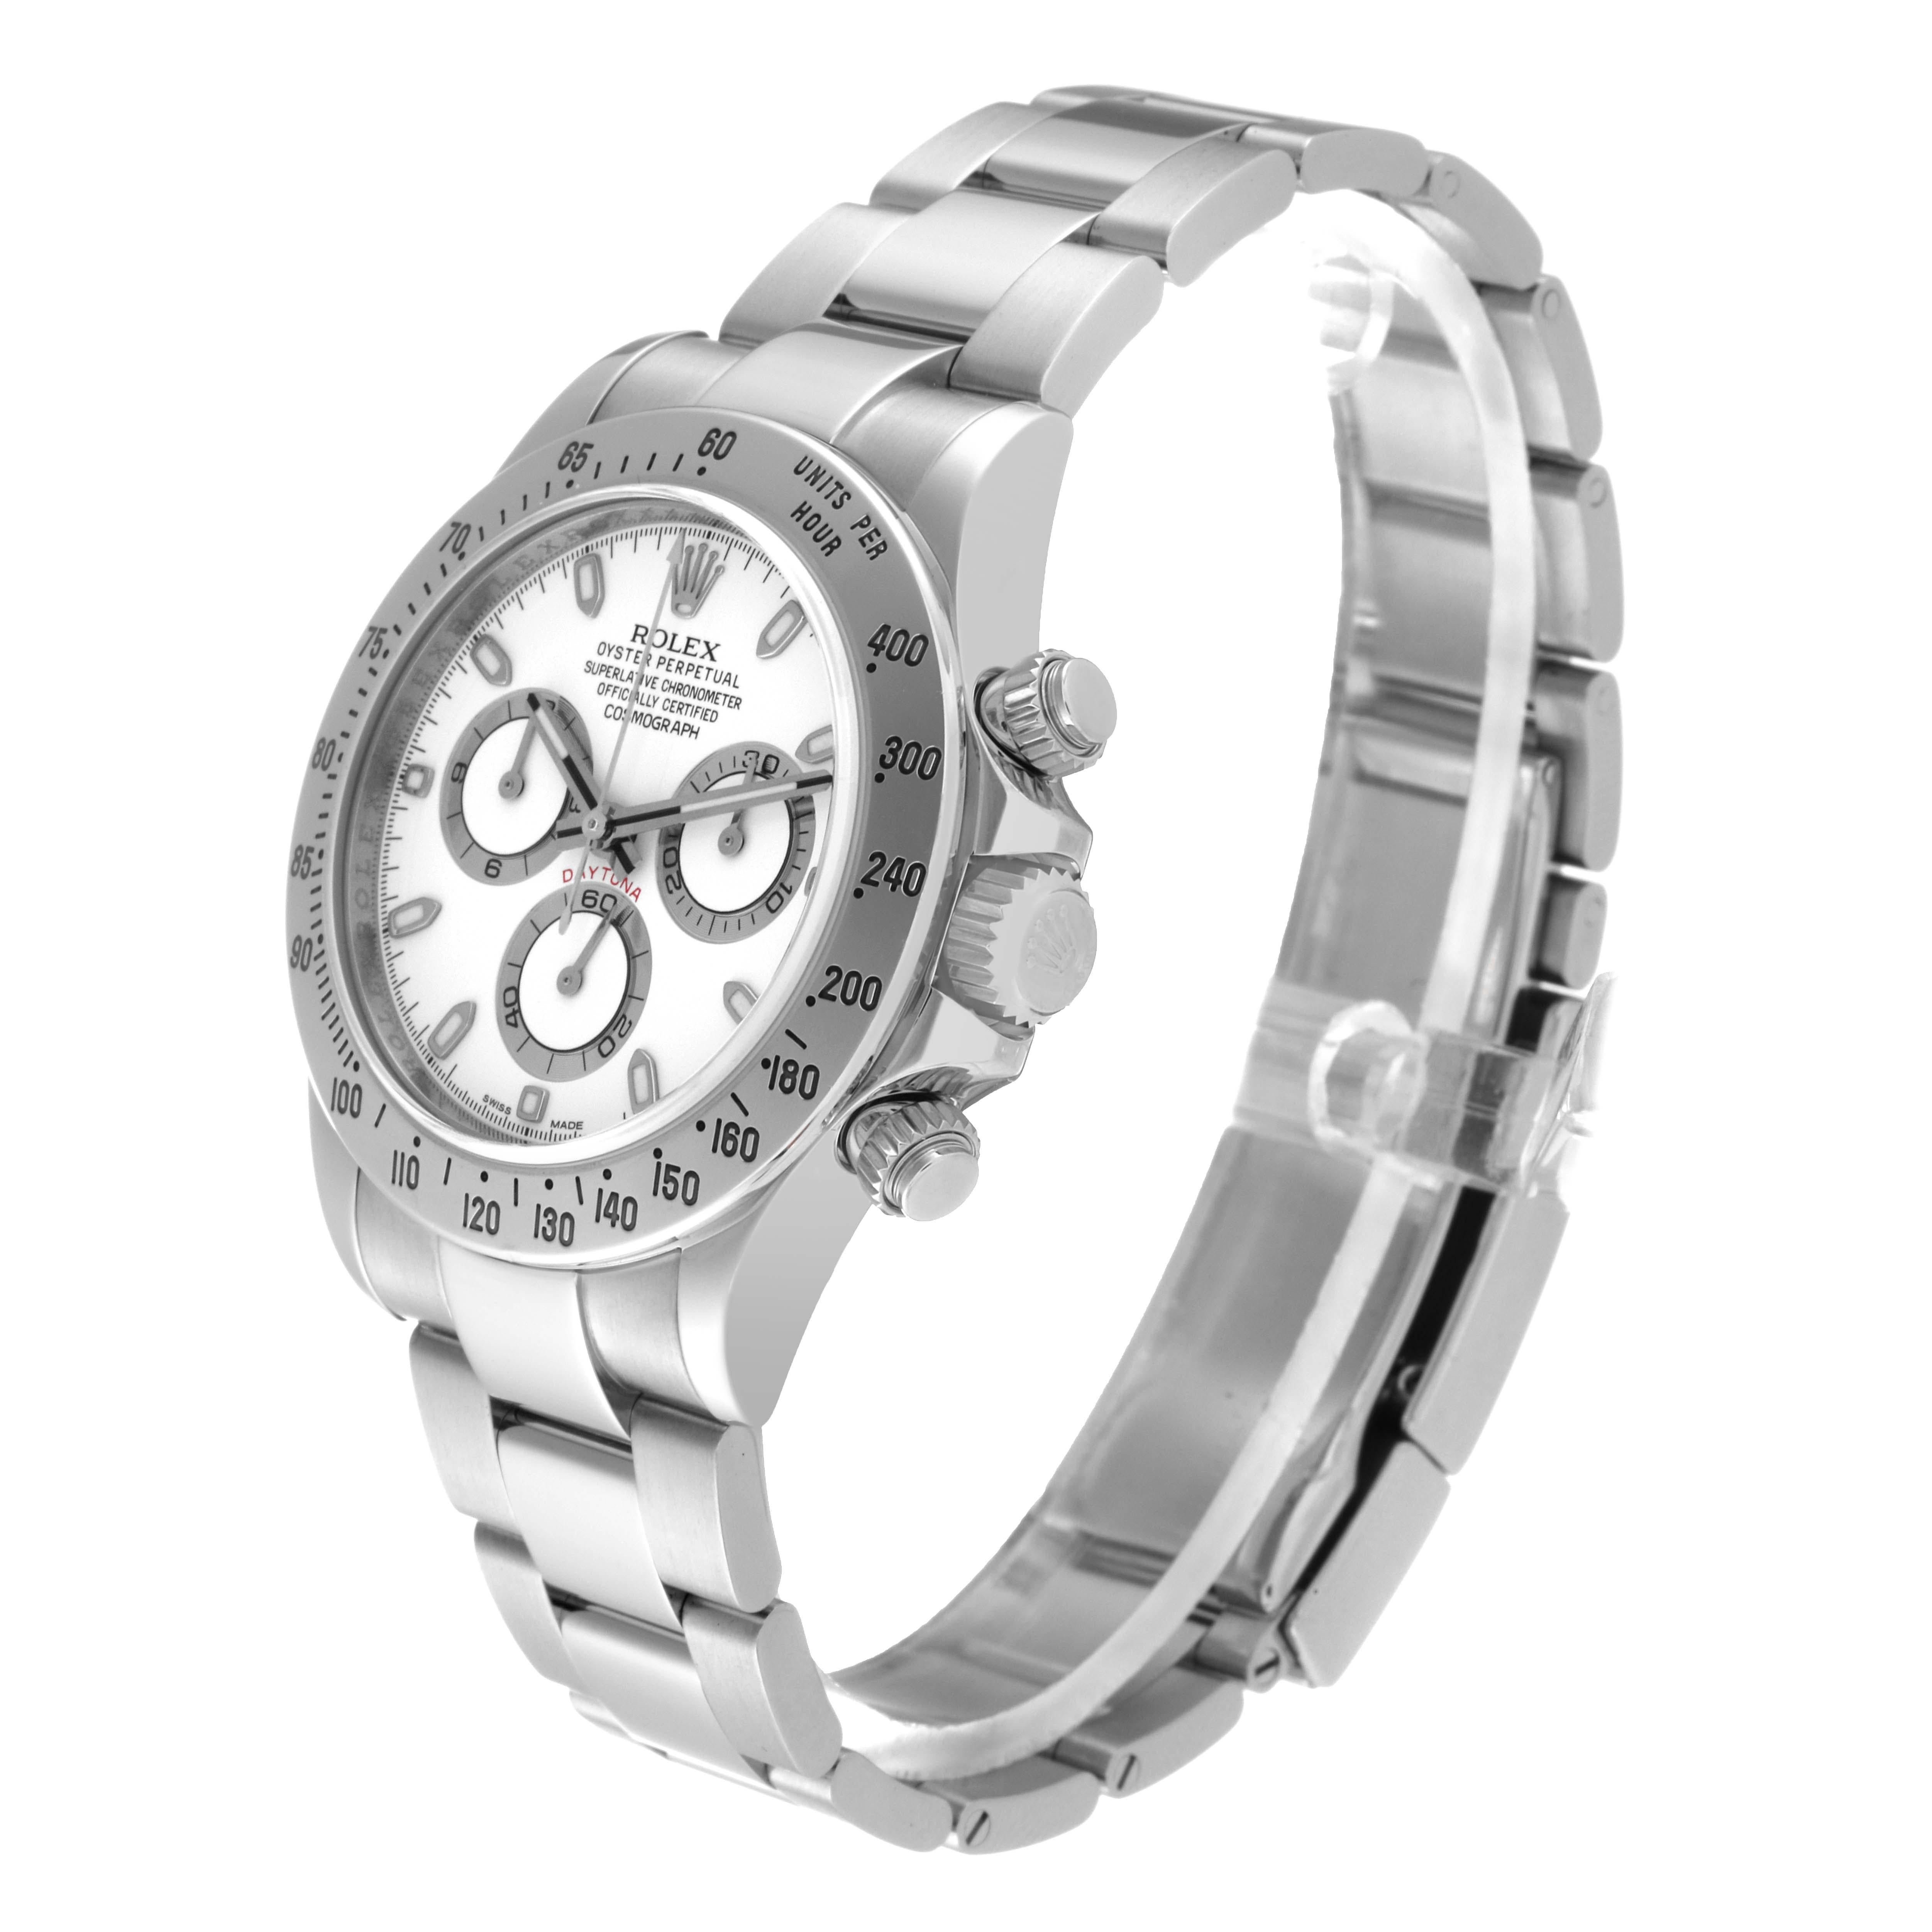 Rolex Daytona White Dial Chronograph Steel Mens Watch 116520 Box Card For Sale 3